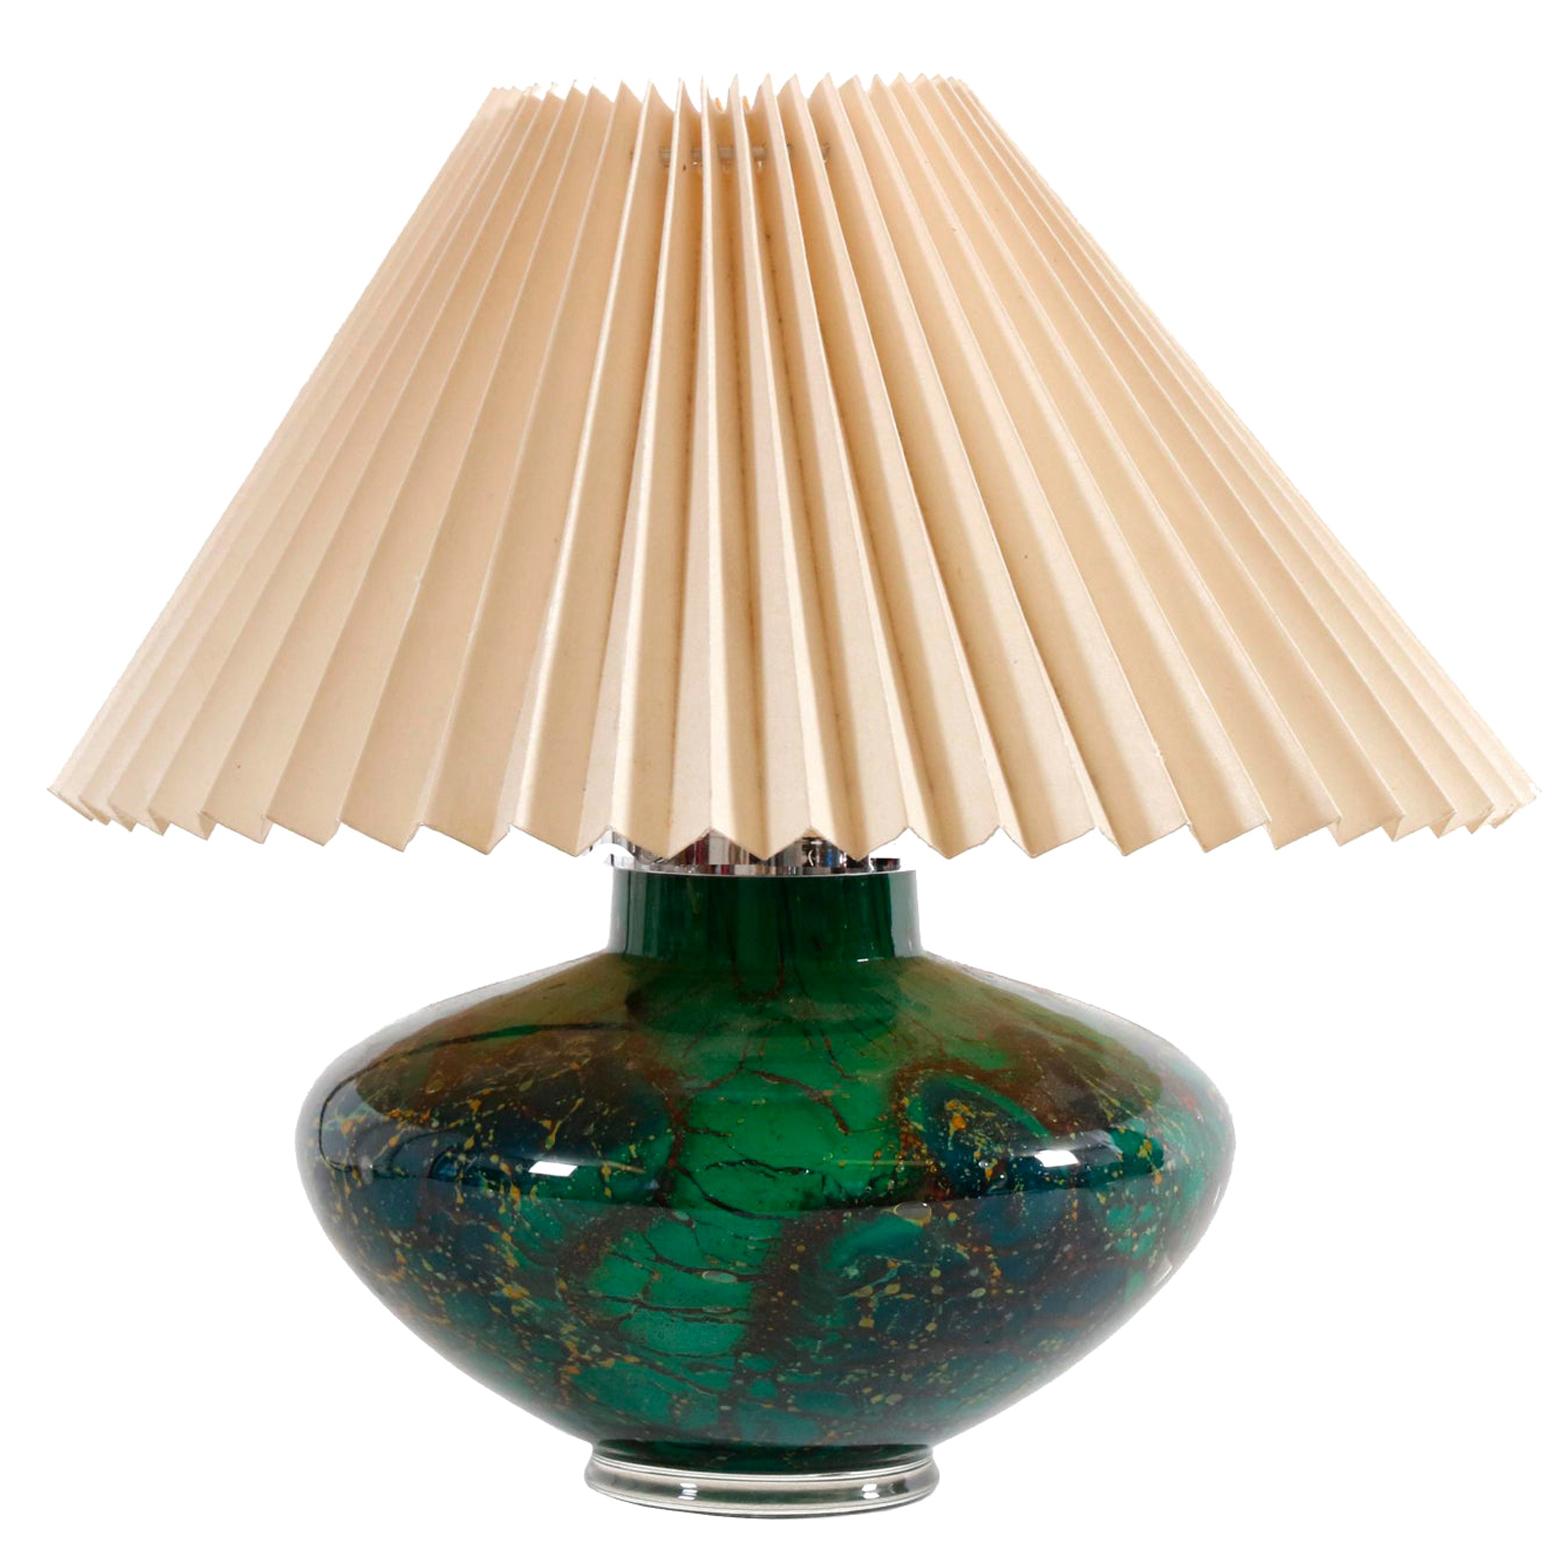 Art Deco WMF Ikora Art Glass in Green, Black and Gold, Table Lamp For Sale